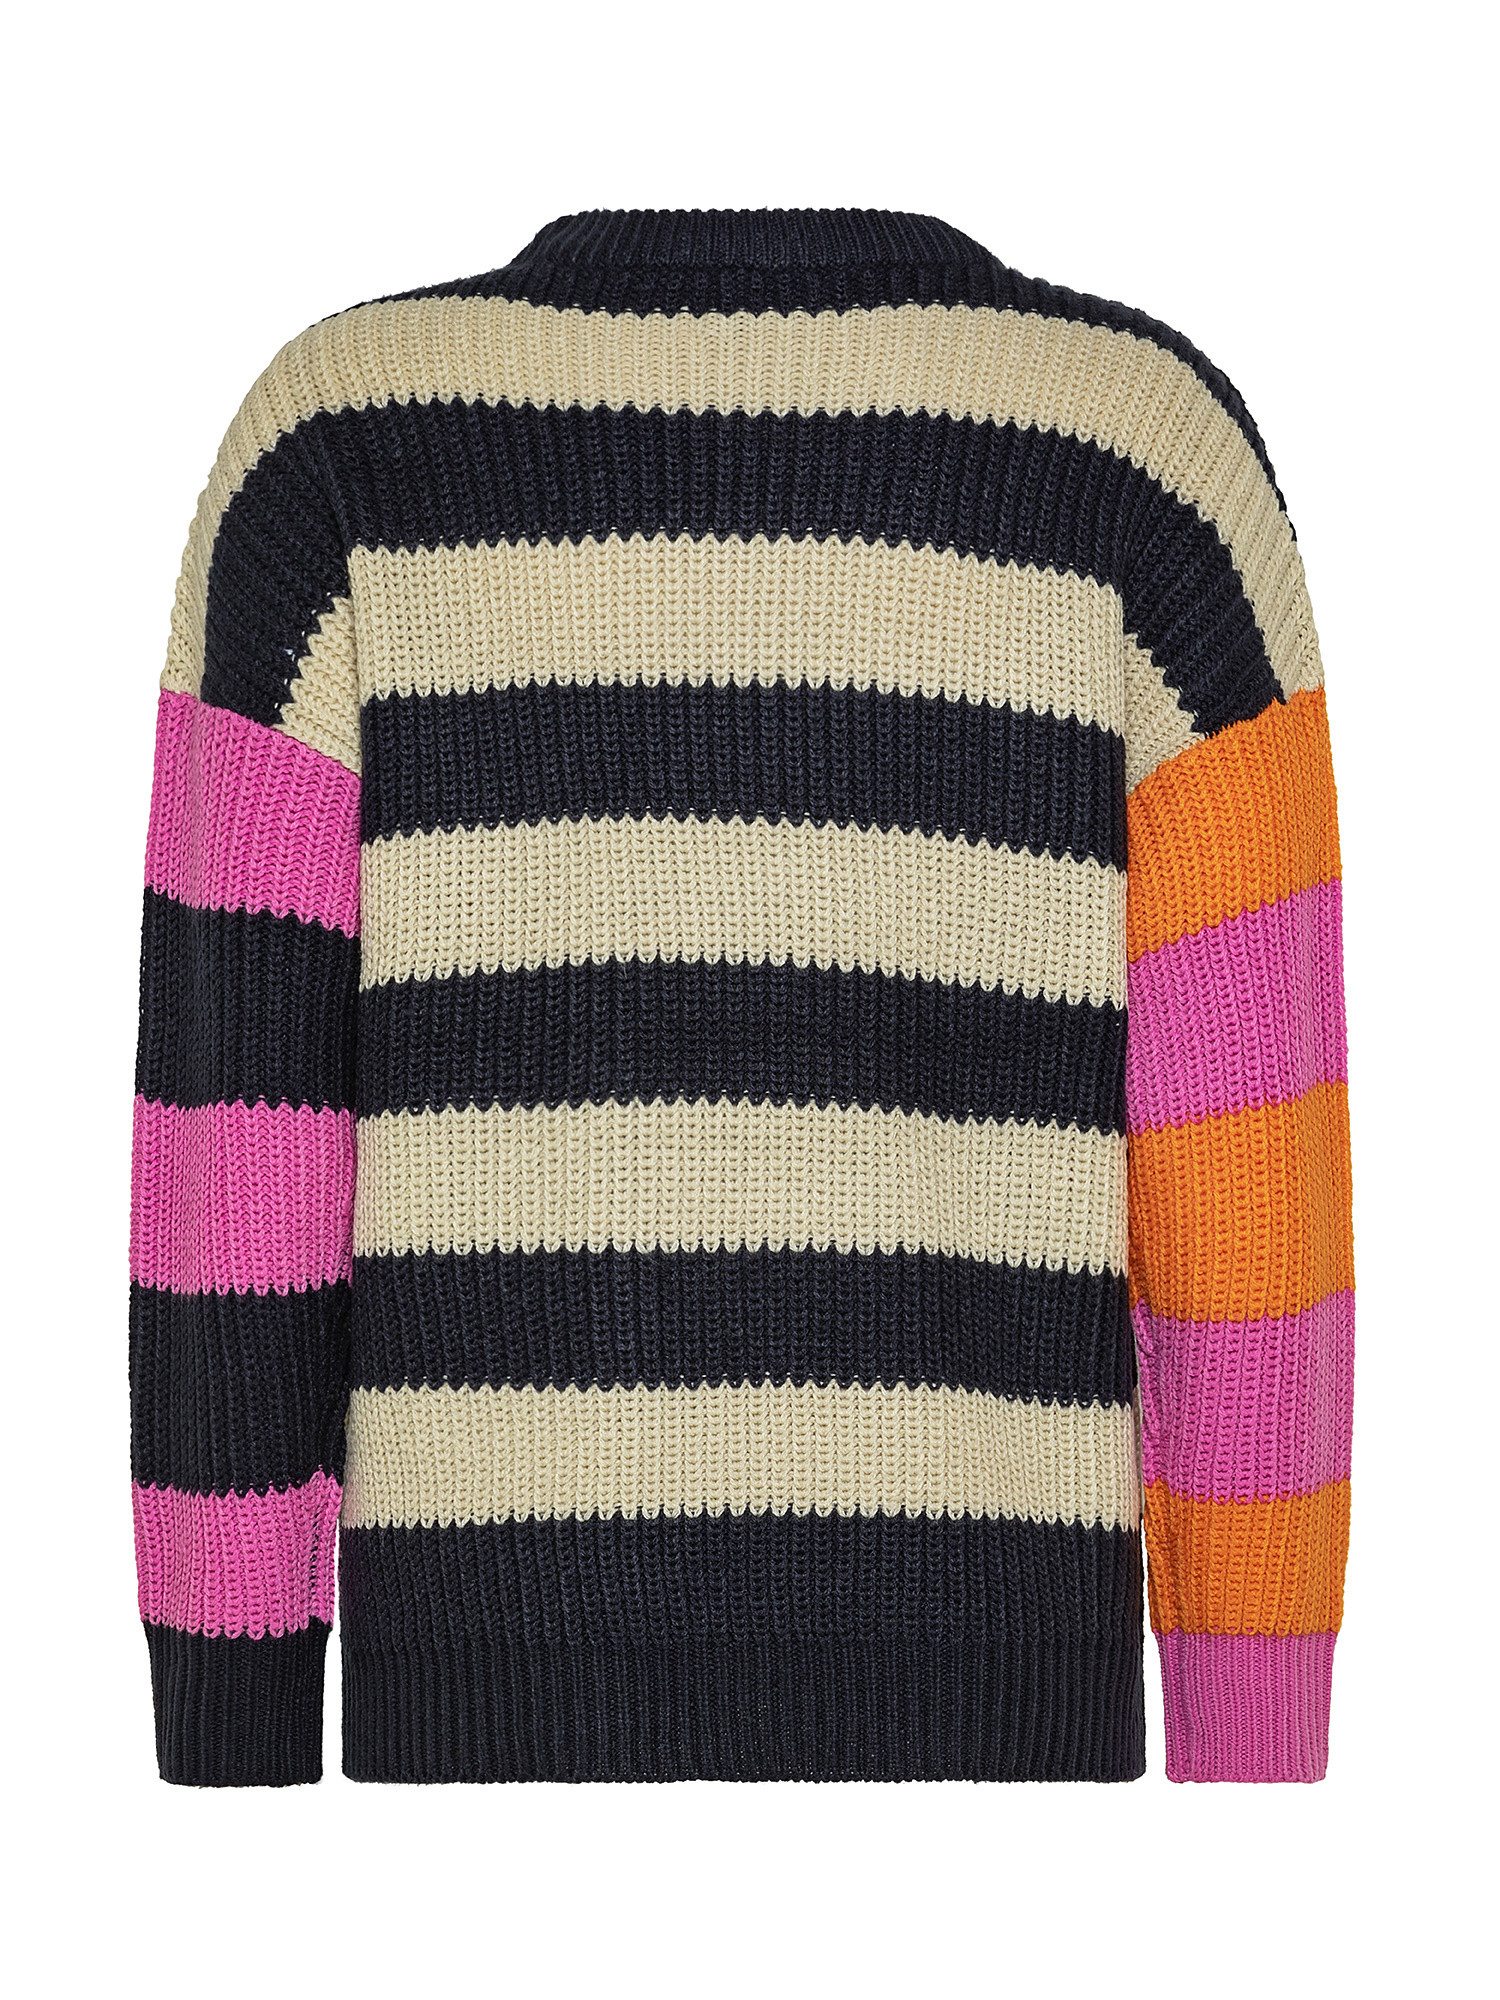 sweater with multicolor striped pattern, Multicolor, large image number 1